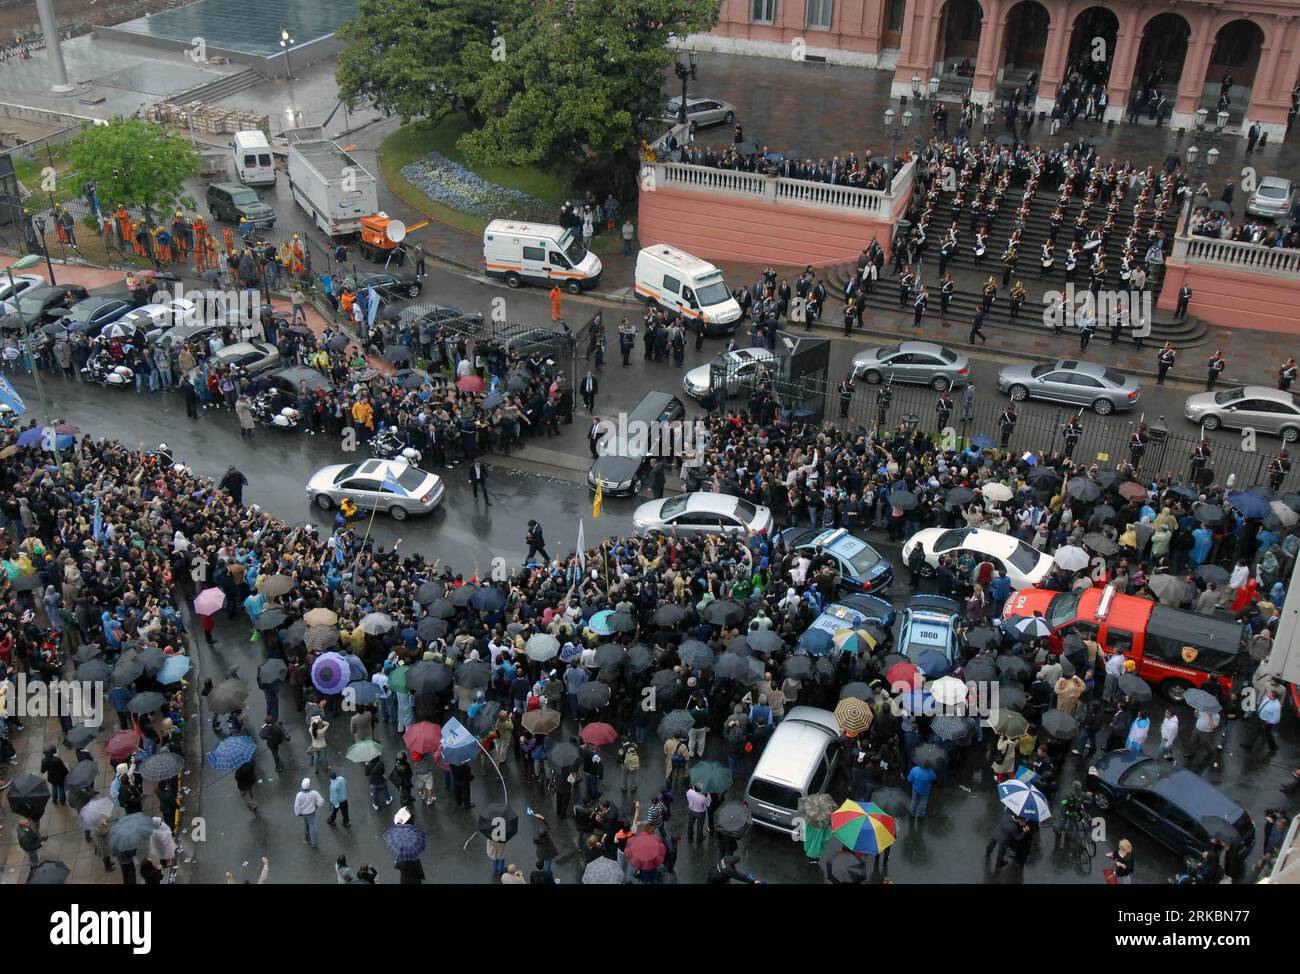 Bildnummer: 54585408  Datum: 29.10.2010  Copyright: imago/Xinhua (101029) --  BUENOS AIRES, Oct. 29, 2010 (Xinhua) -- pay respect to the hearse which carries the remains of former Argentine President Nestor Kirchner from the Casa Rosada Presidential Palace to a local airport for a flight to his home El Calafate, Province of Santa Cruz, where he will be buried in his family cemetery, Oct. 29, 2010 (Xinhua/Leonardo Zavattaro/Telam) ARGENTINA-BUENOS AIRES-KIRCHNER-FUNERAL PUBLICATIONxNOTxINxCHN People Politik Beerdigung Trauer Kirchner premiumd kbdig xcb 2010 quer o0 Totale    Bildnummer 54585408 Stock Photo